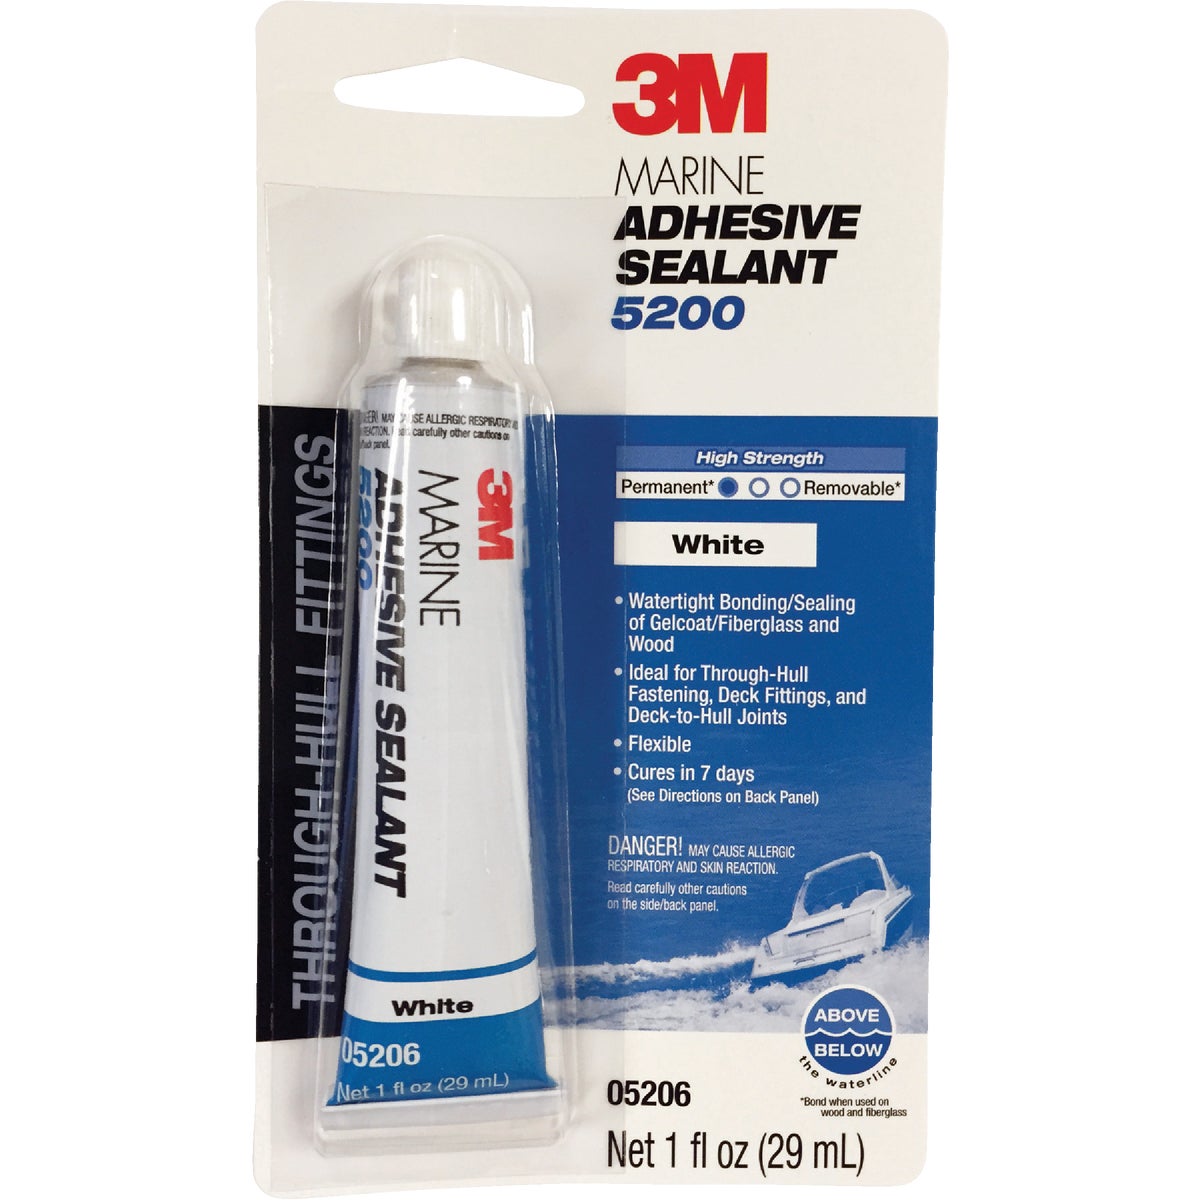 Item 579793, This high-performance polyurethane adhesive/sealant becomes tack free in 48